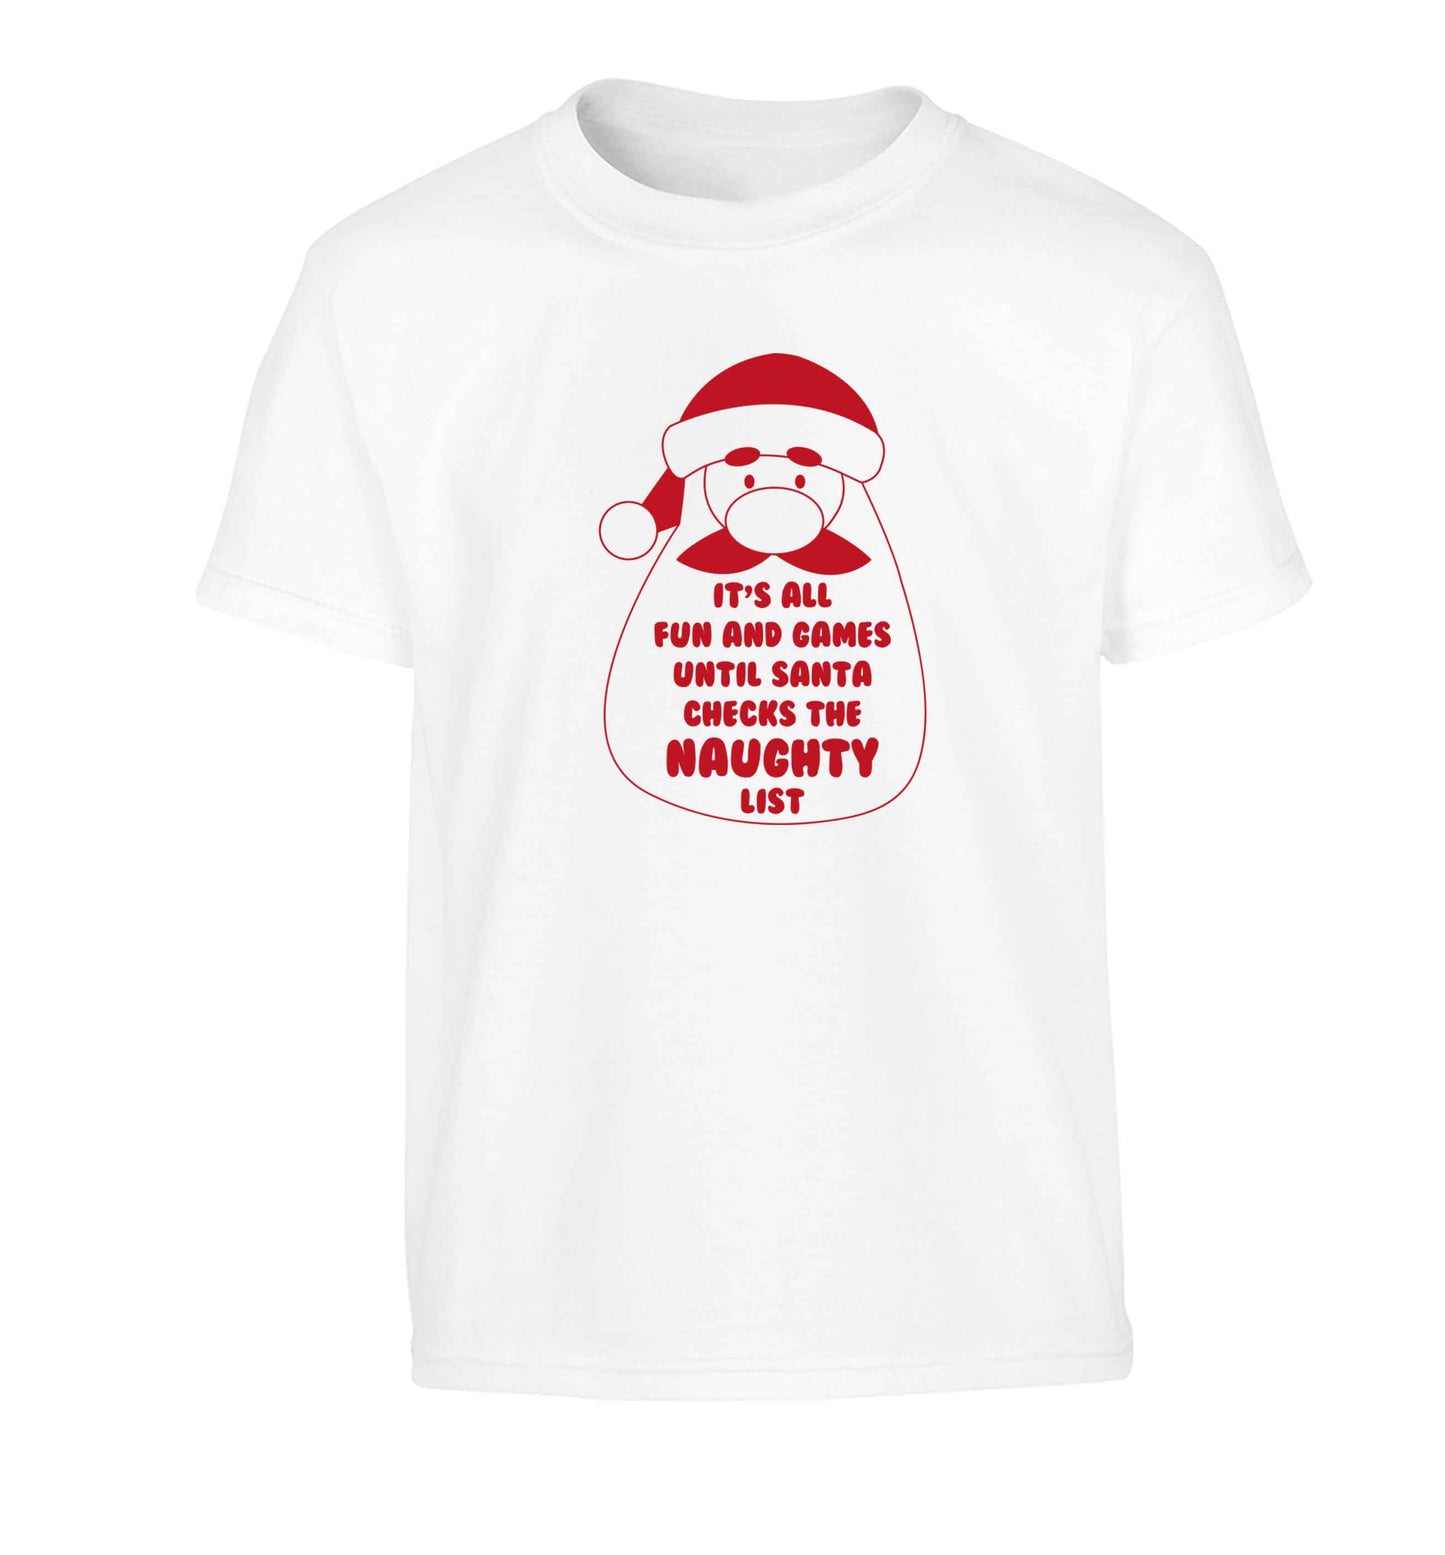 It's all fun and games until Santa checks the naughty list Children's white Tshirt 12-13 Years